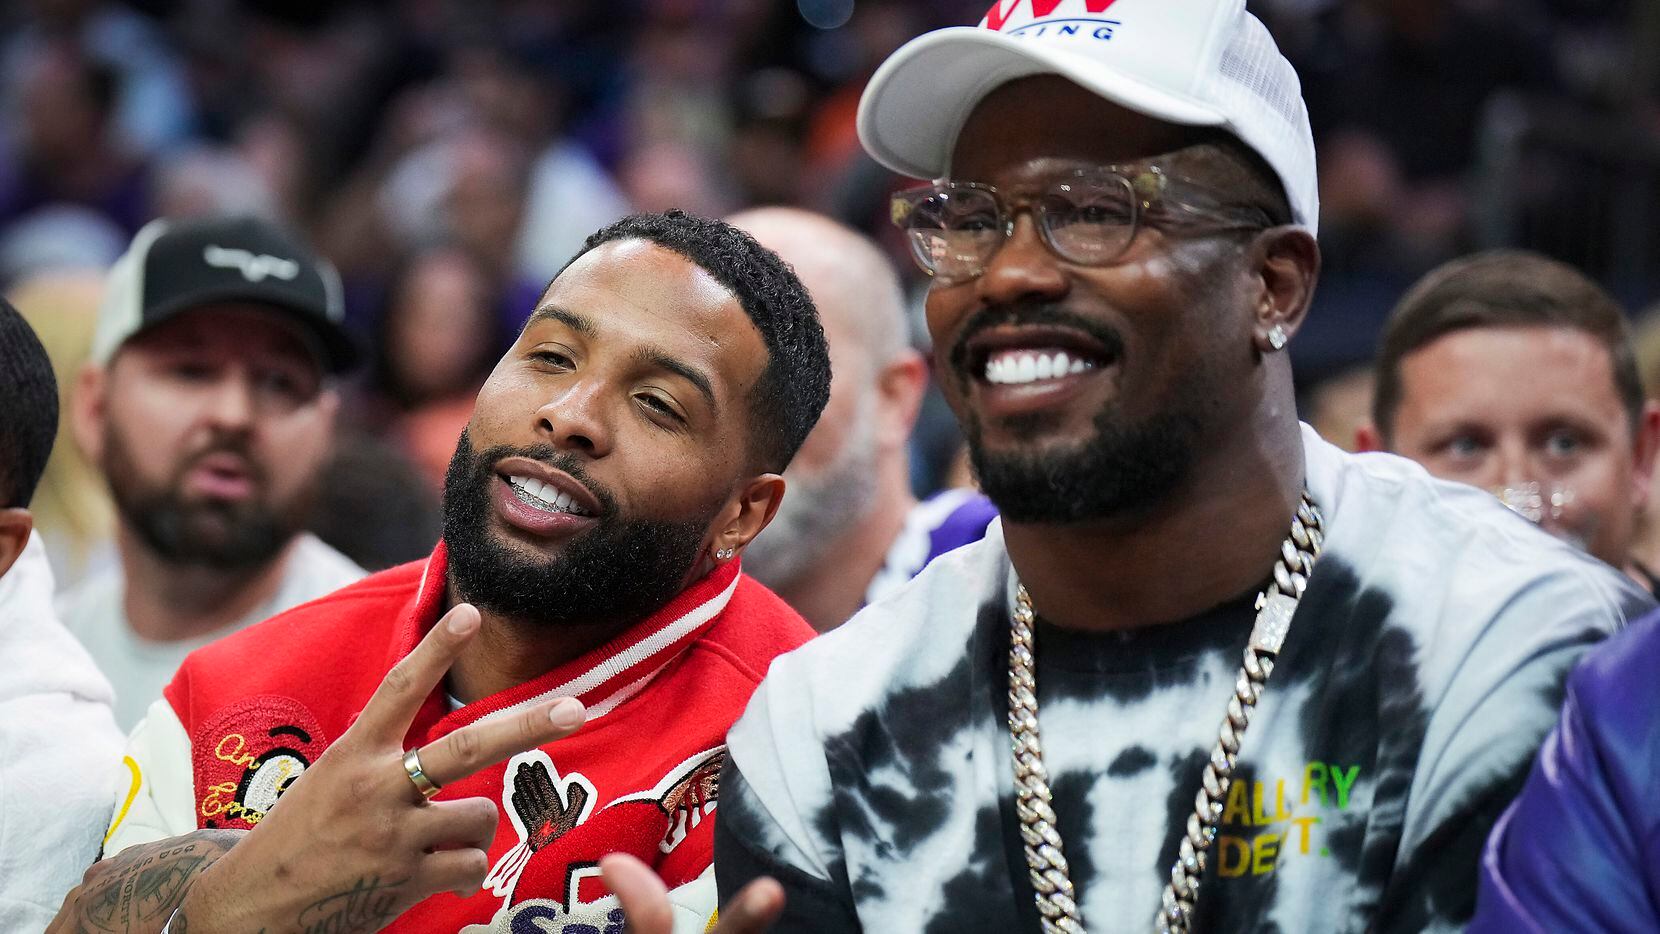 NFL players Von Miller (right) and Odell Beckham Jr. pose for a photo courtside during the...